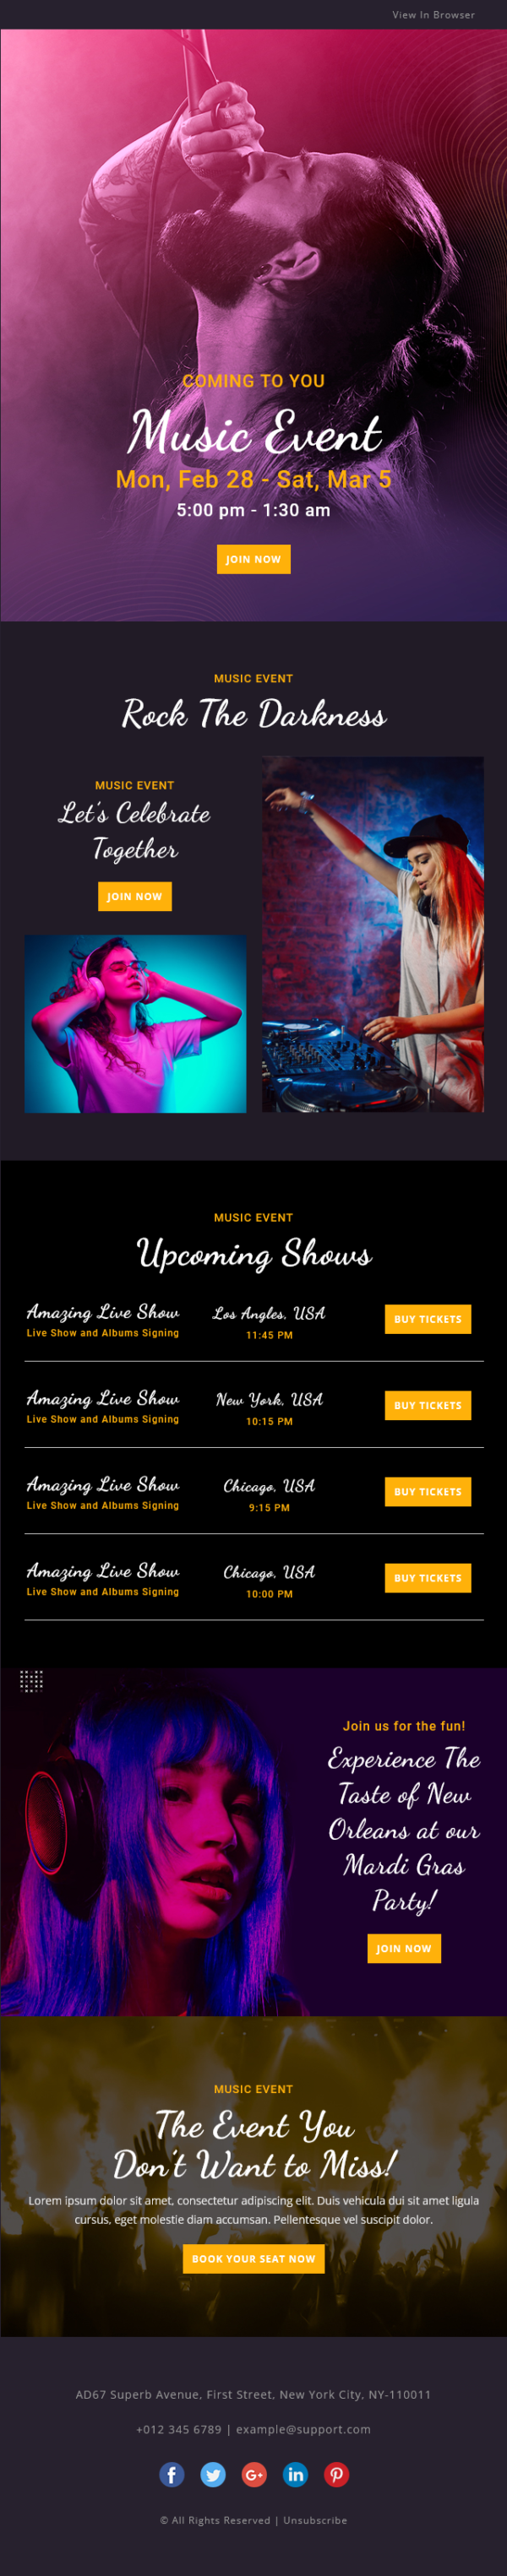 Music Events - Multipurpose Responsive Email Template